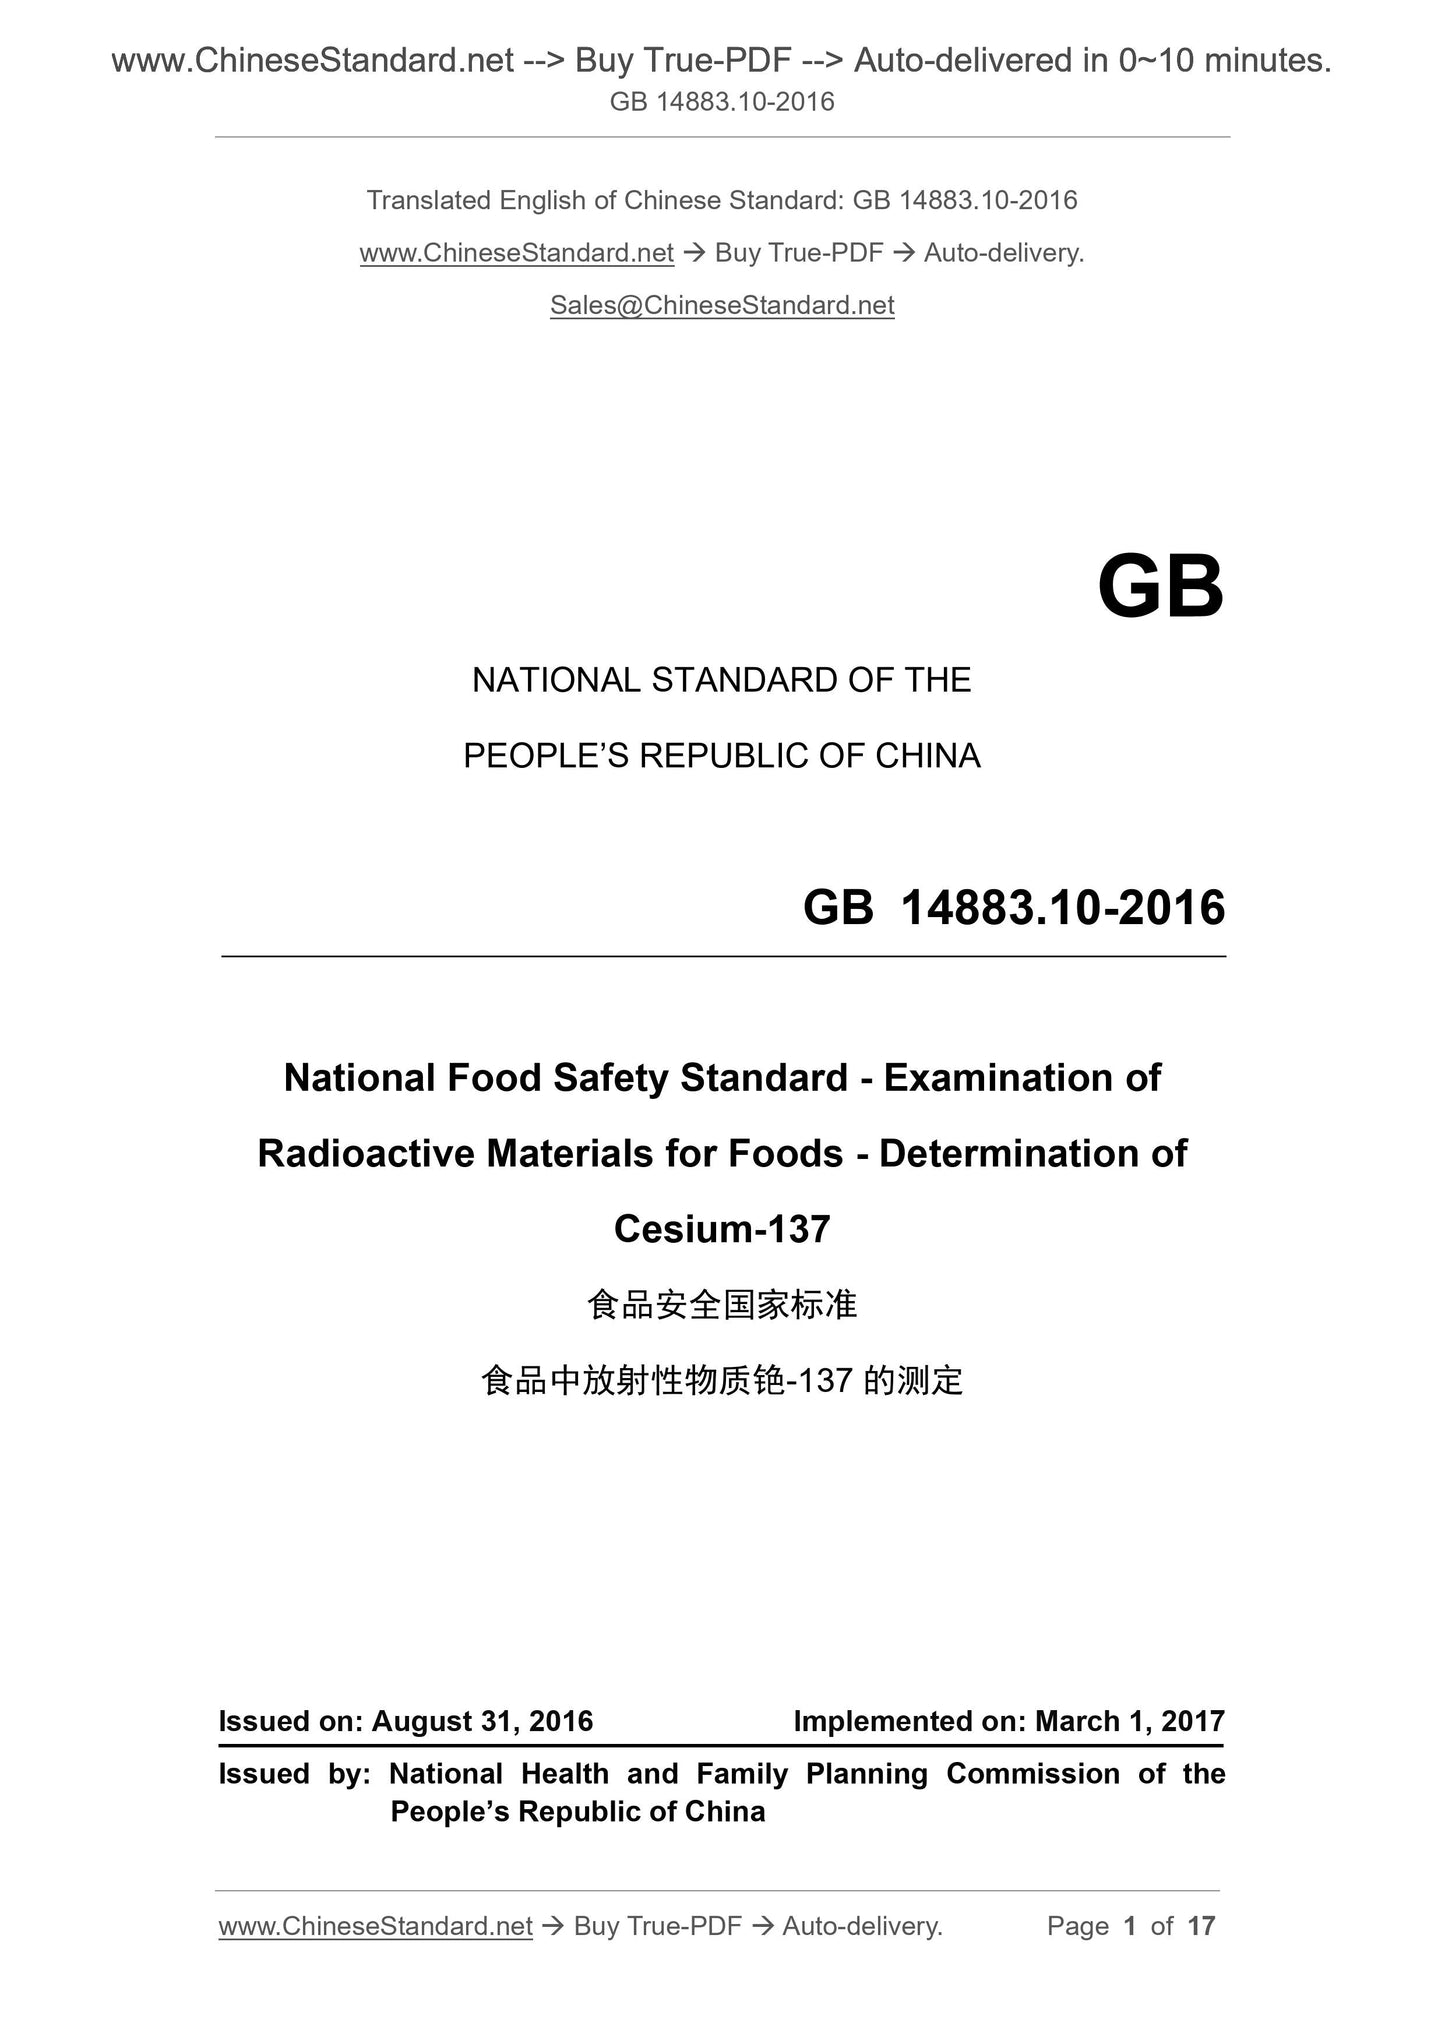 GB 14883.10-2016 Page 1